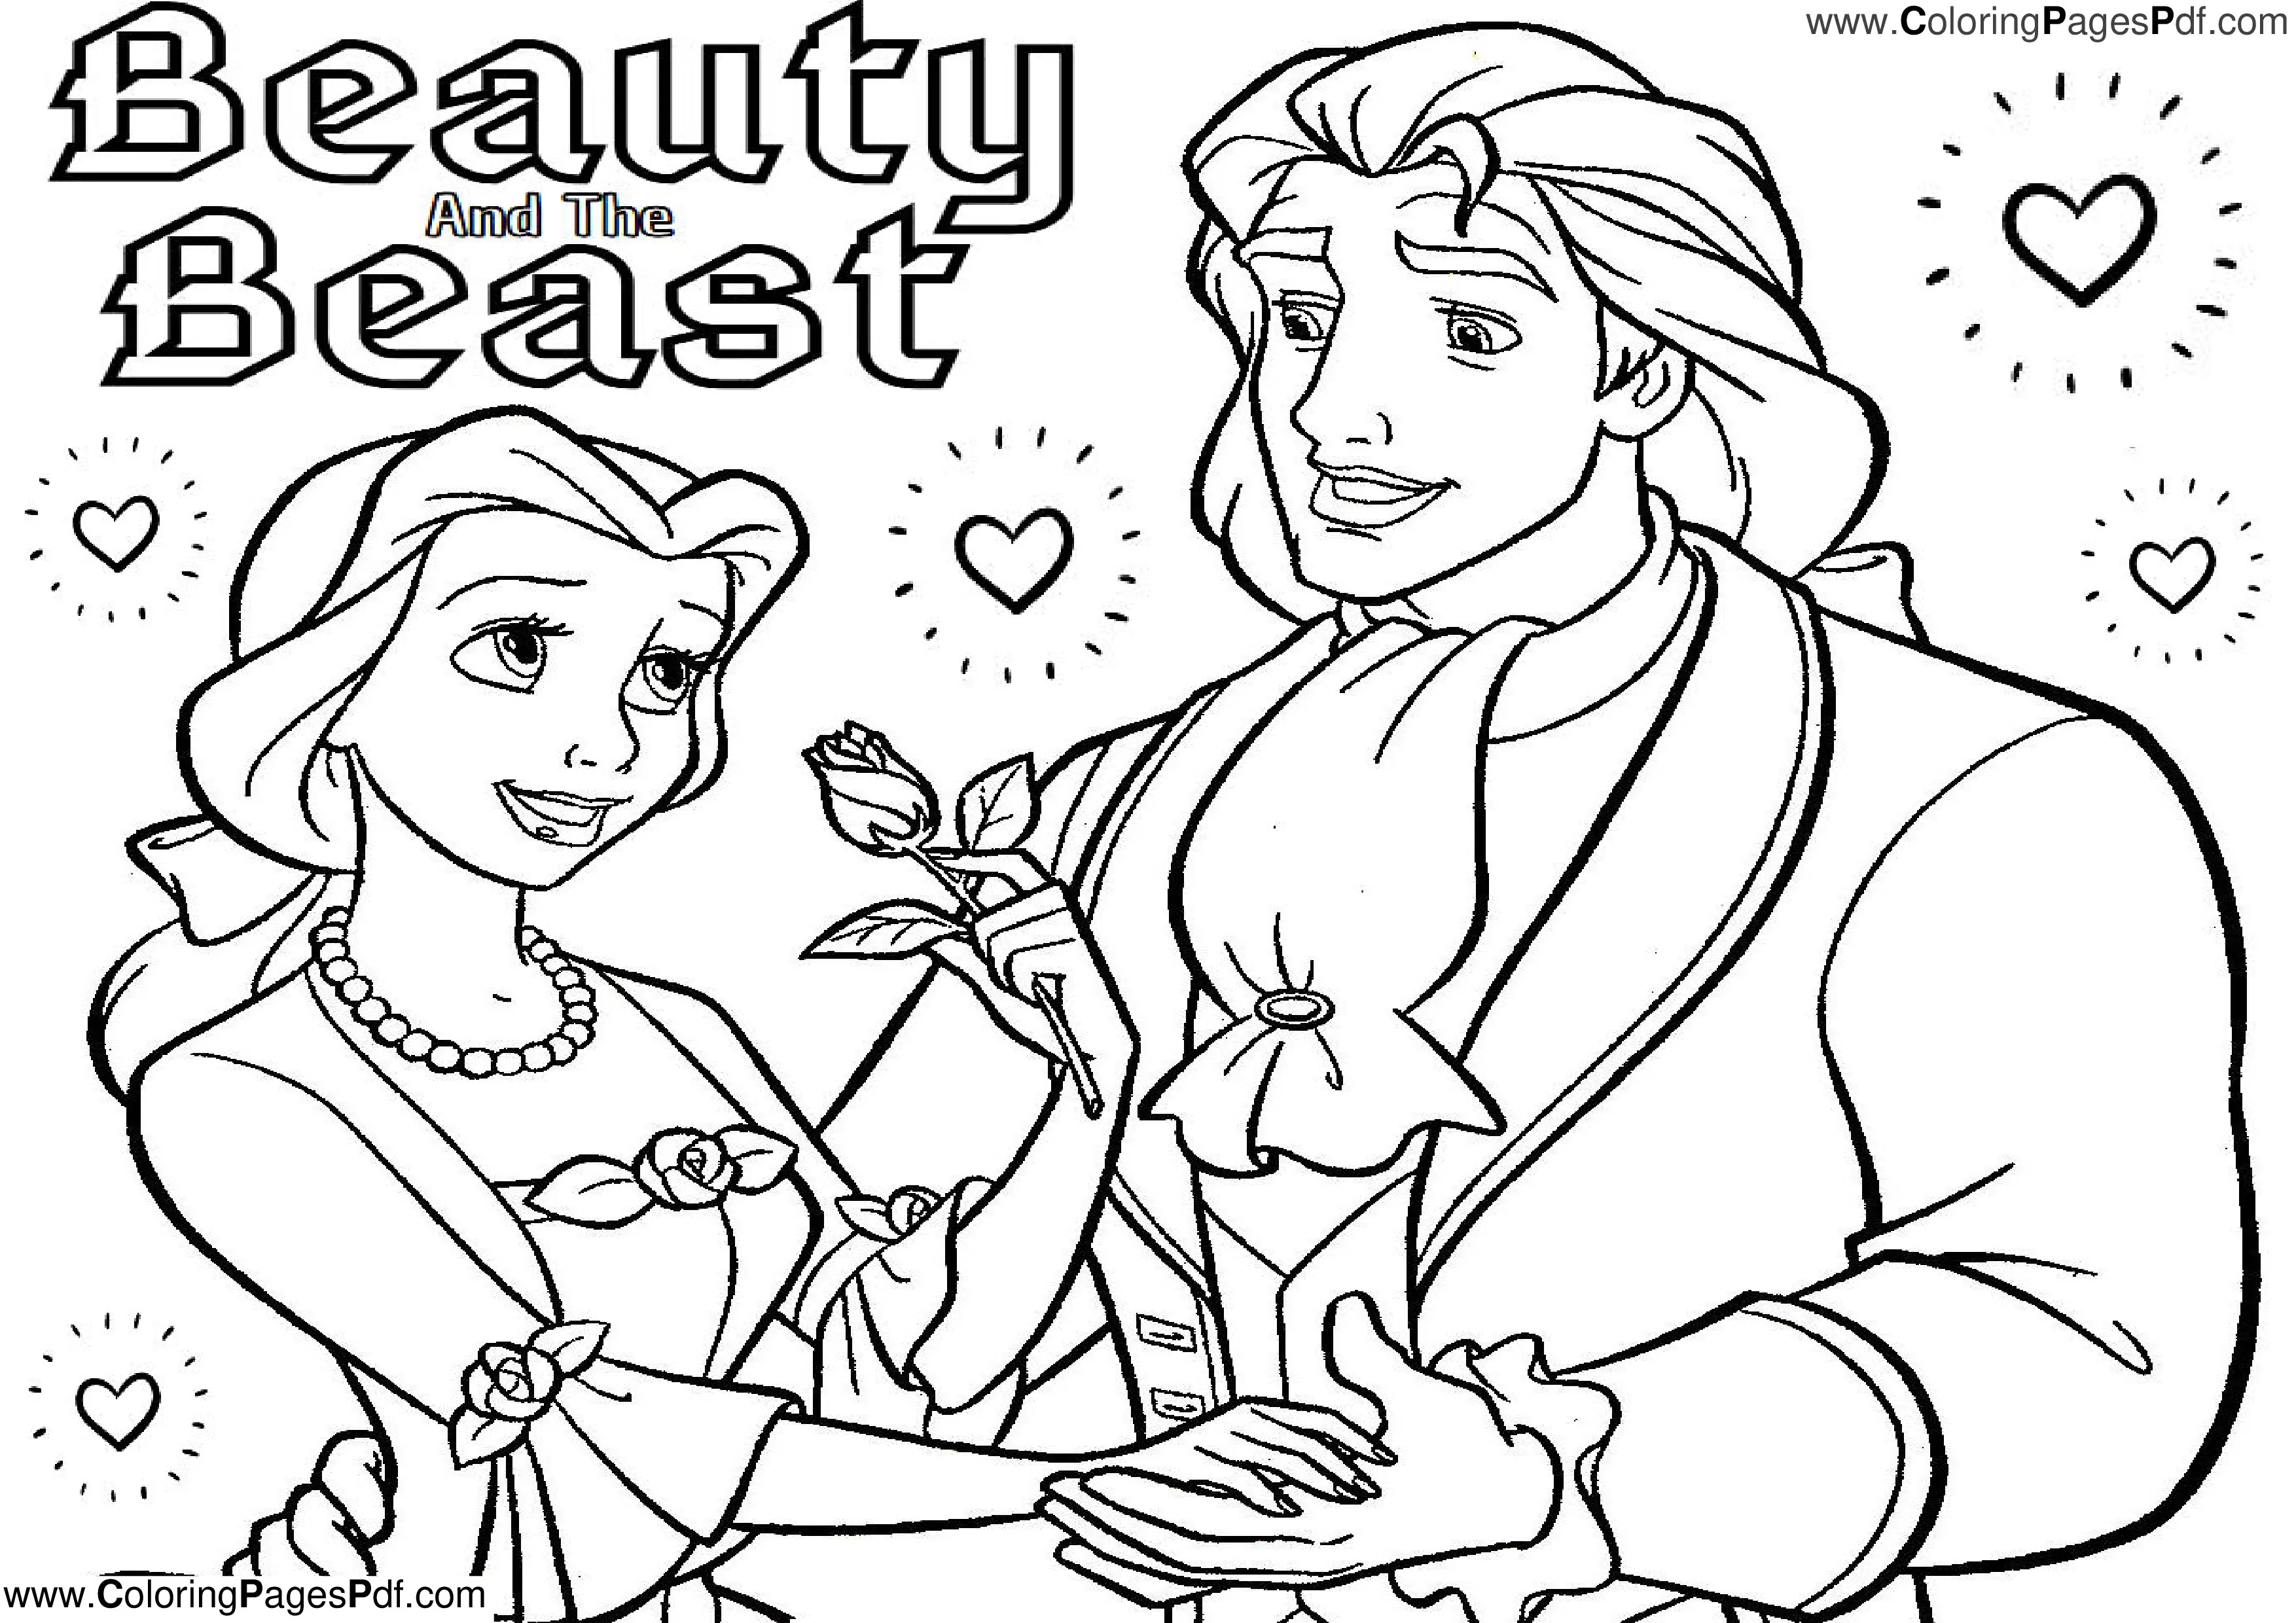 Beauty and the beast free printables